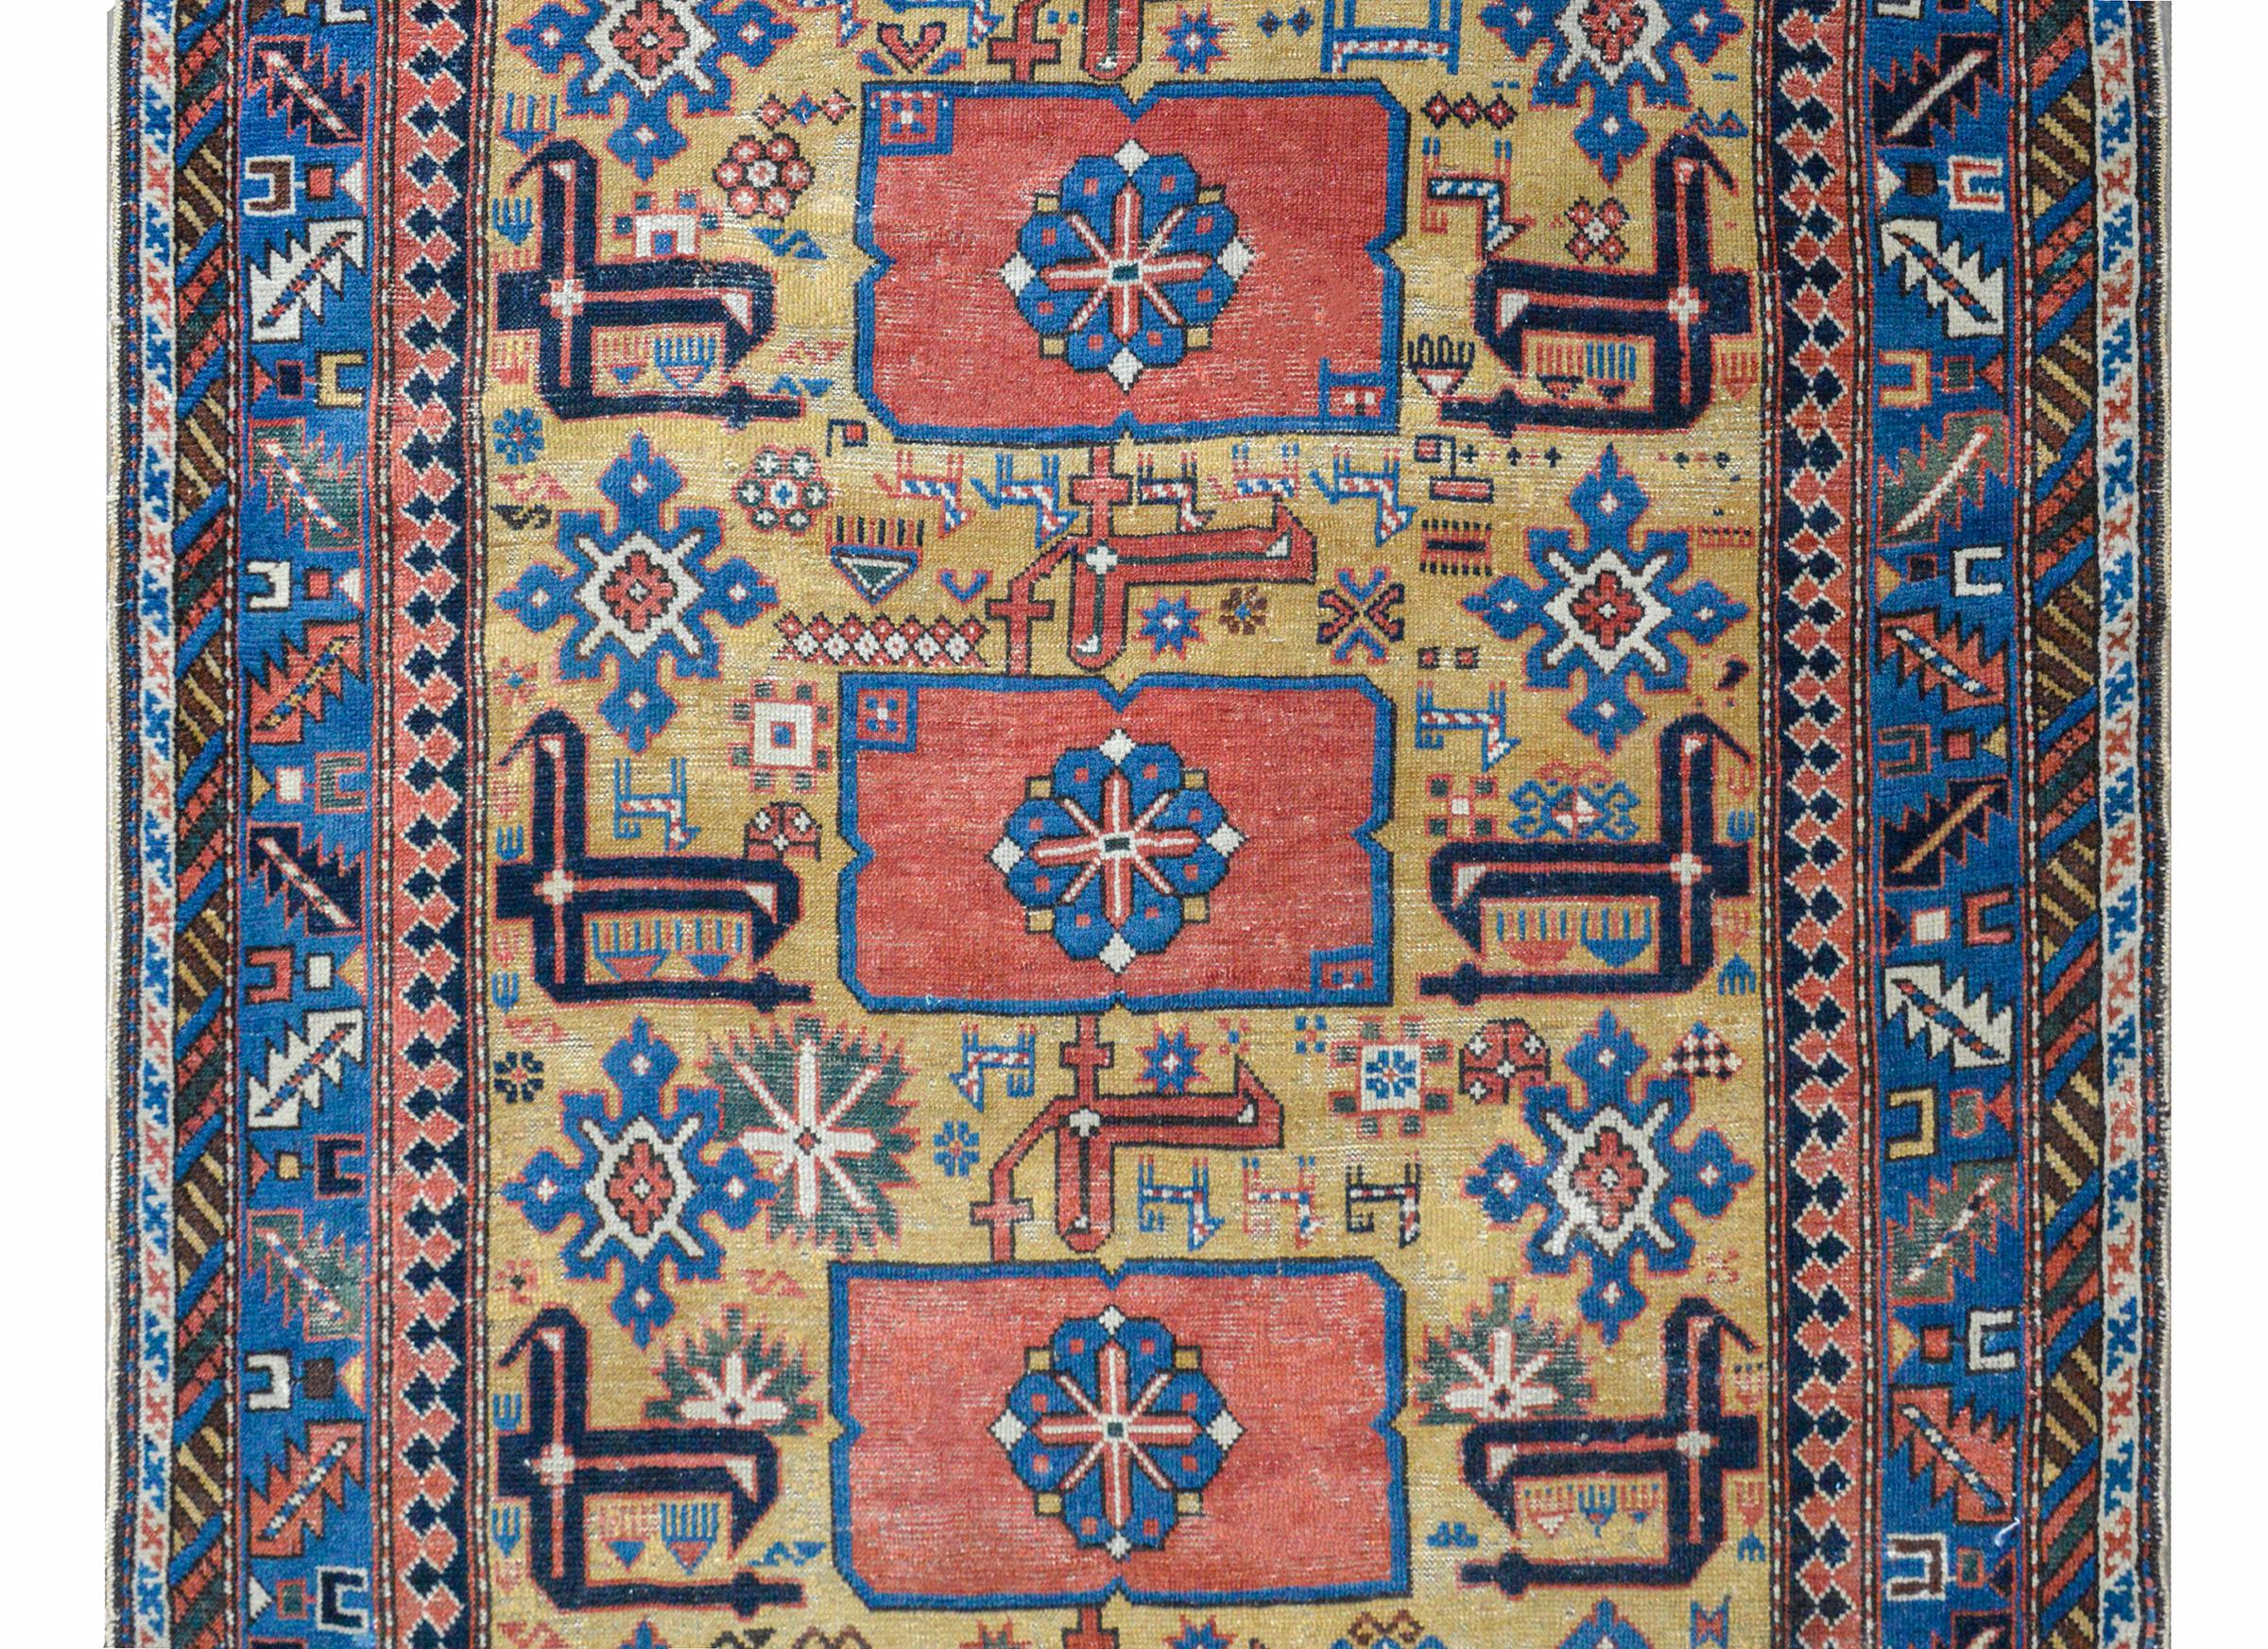 An incredible early 20th century Qaraqashli rug with boldly stylized floral medallions against gold field of more stylized flowers all woven in light and dark indigo, coral, and white, and surrounded by a wonderful wide border with more stylized